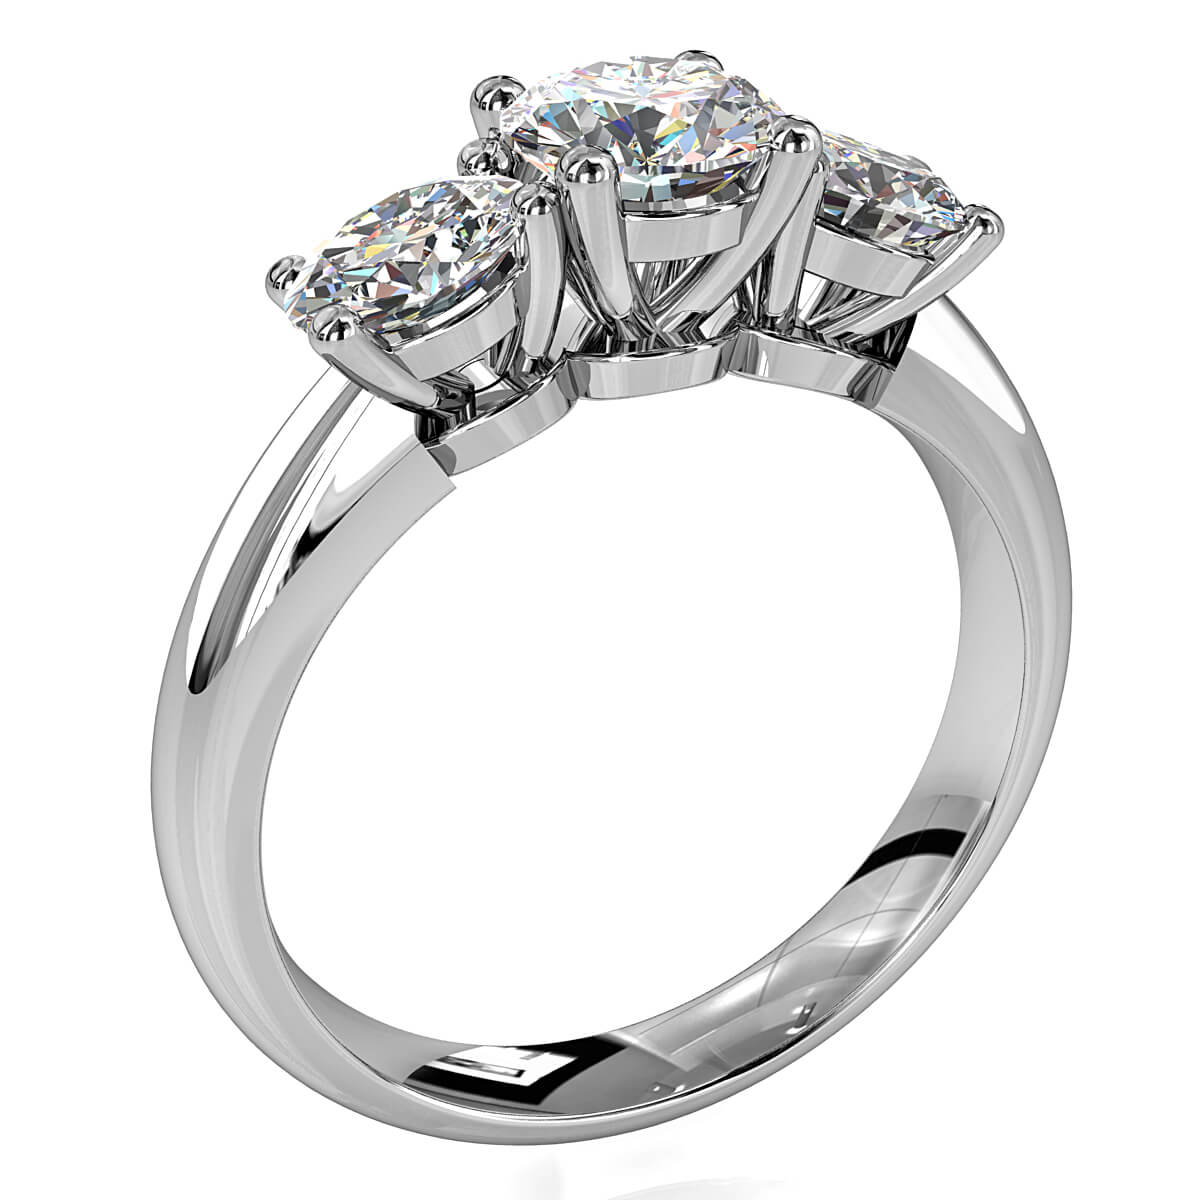 Round Brilliant Cut Diamond Trilogy Engagement Ring, Stones 4 Claw Set on a Rounded Band with Classic Crown Undersetting.